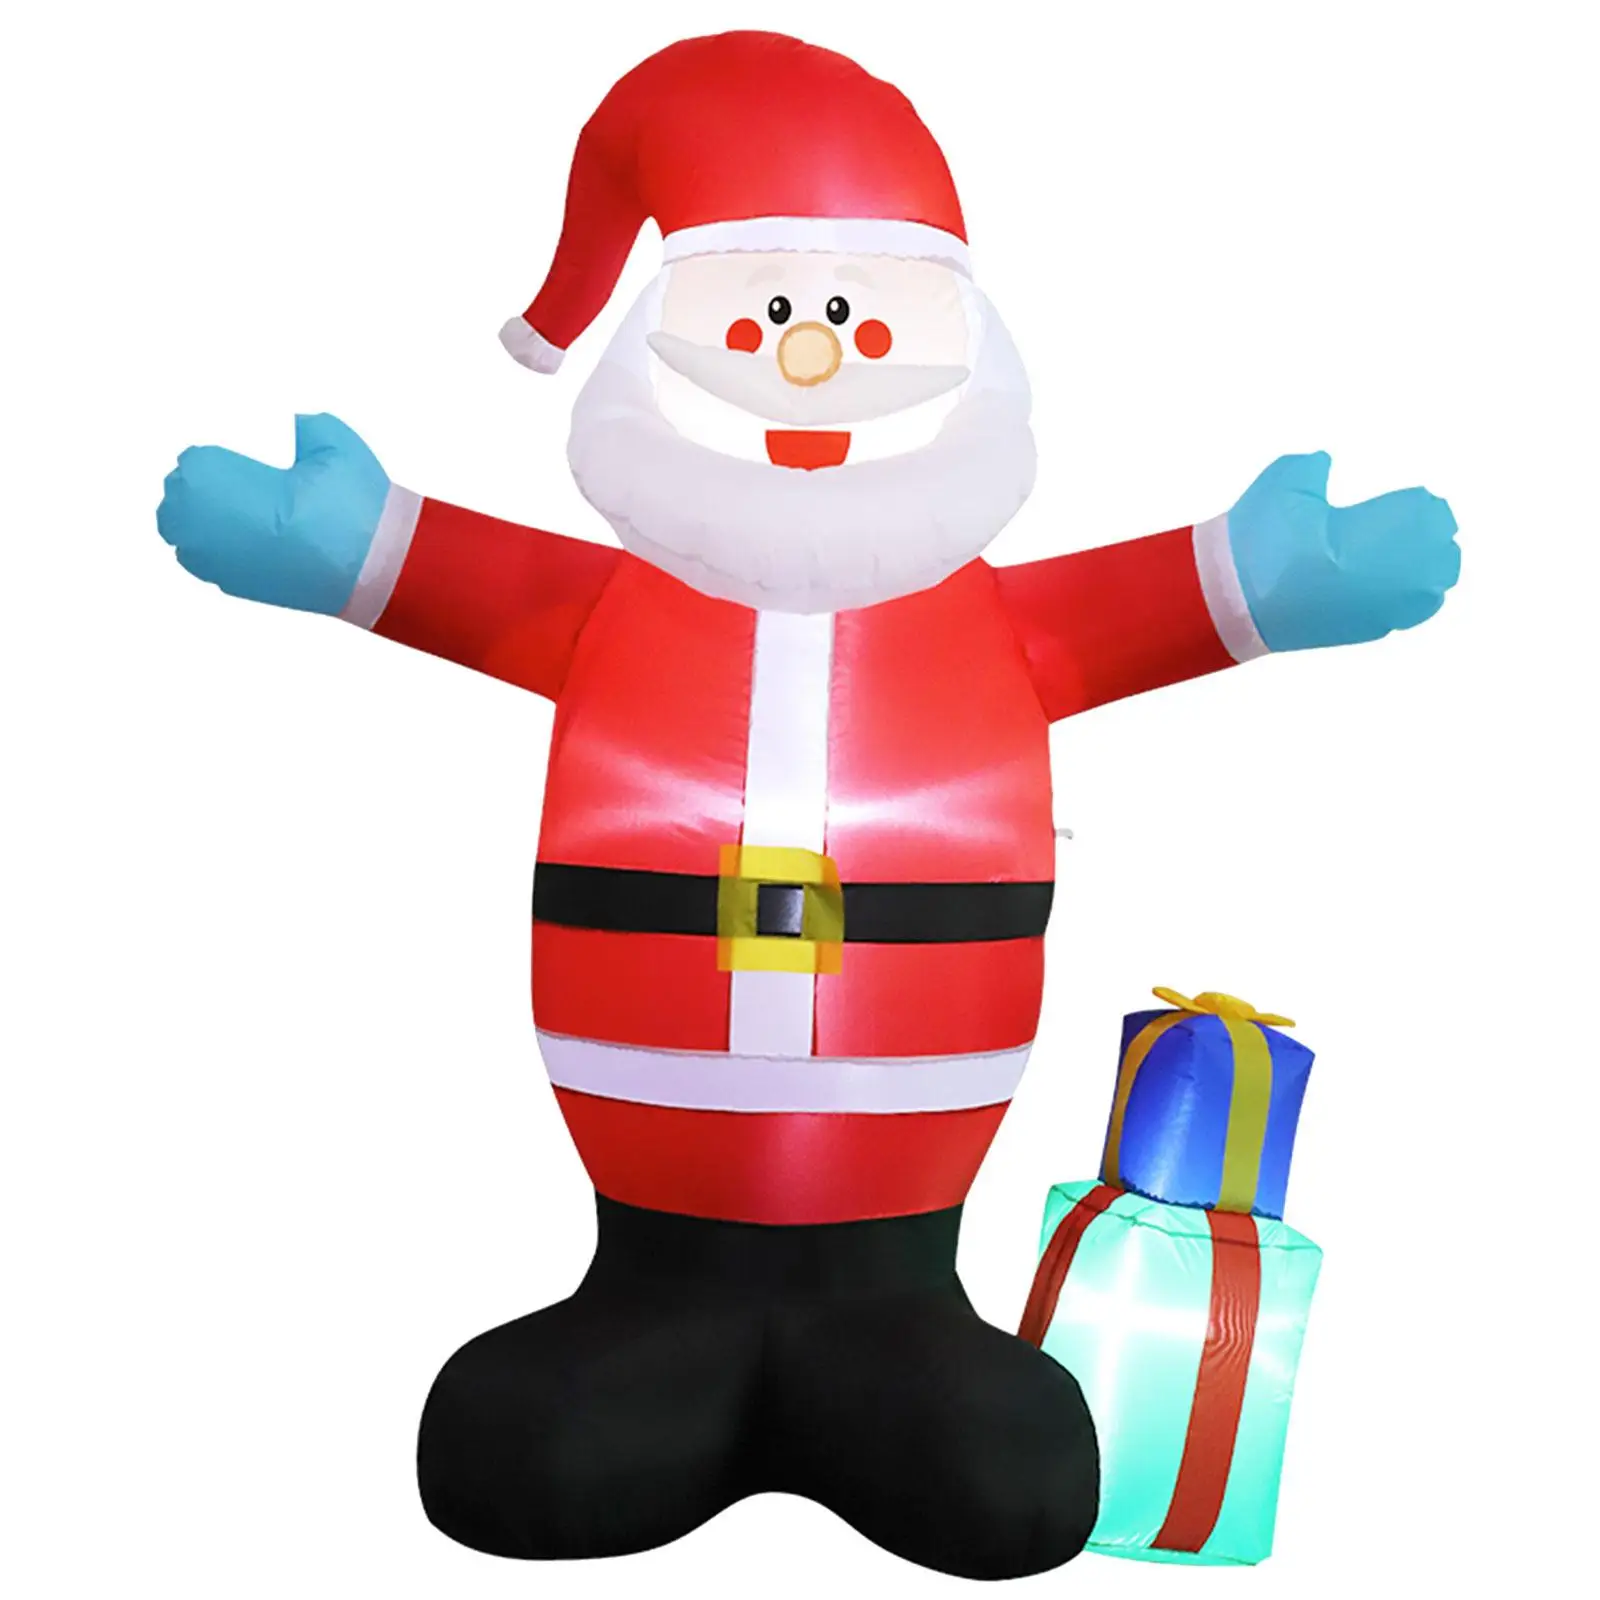 Christmas Inflatable Santa Luminous 4.9ft Tall Props Novelty with LED Lights Xmas Decoration for Garden Yard Outdoor Decor